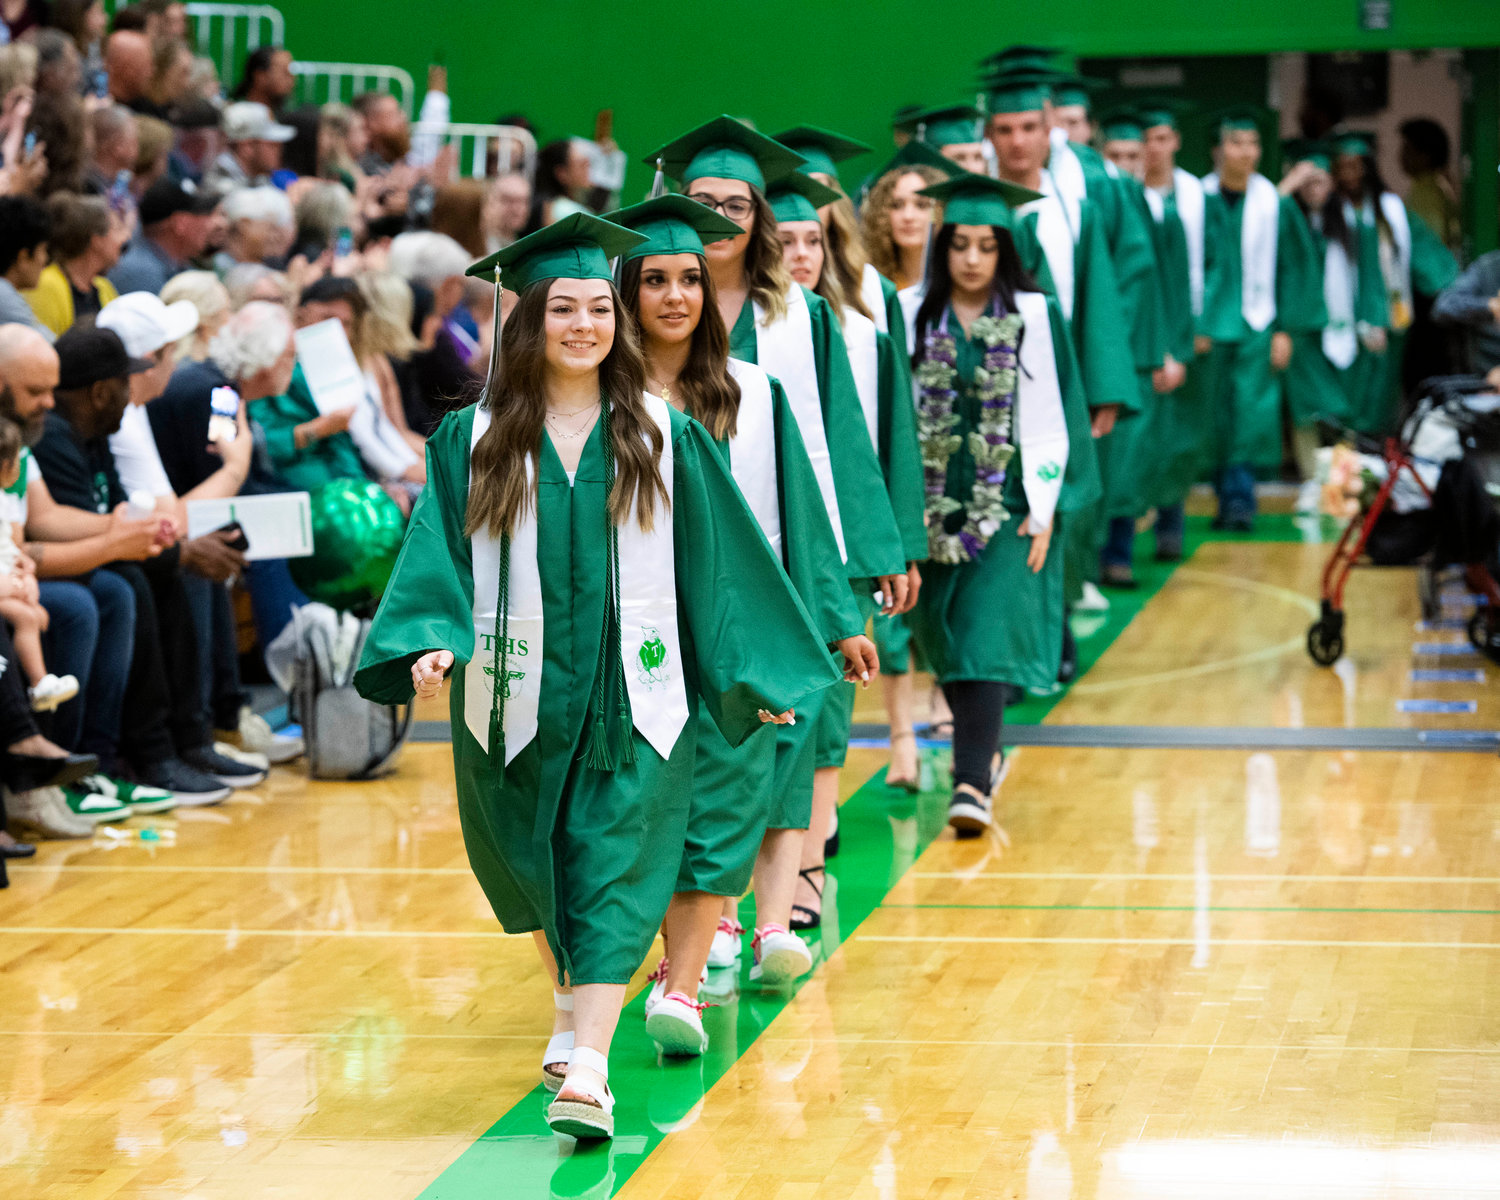 Tumwater High School 2022 graduates marching for their diplomas.